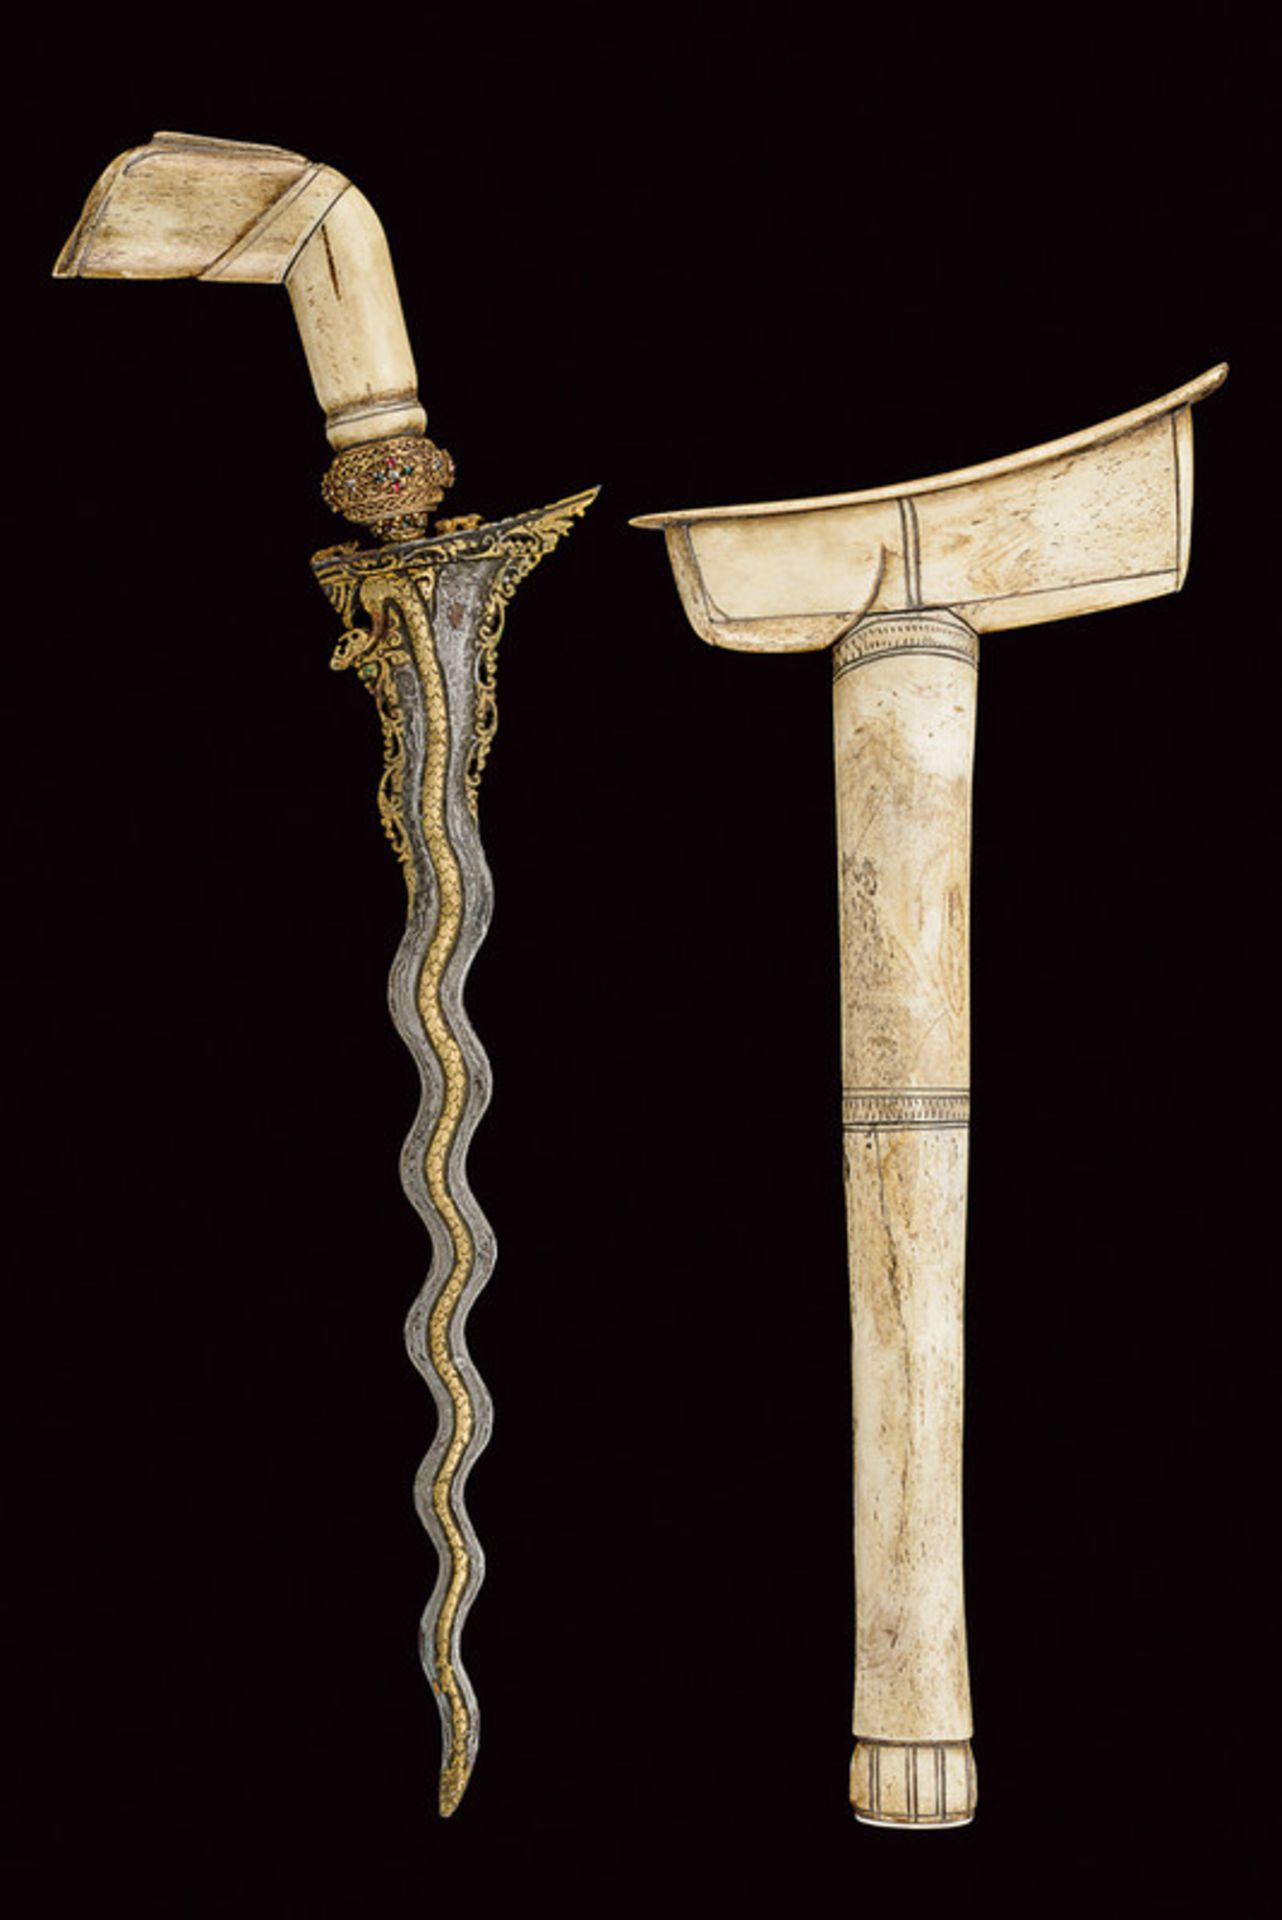 Naga Kris with carved and pierced blade